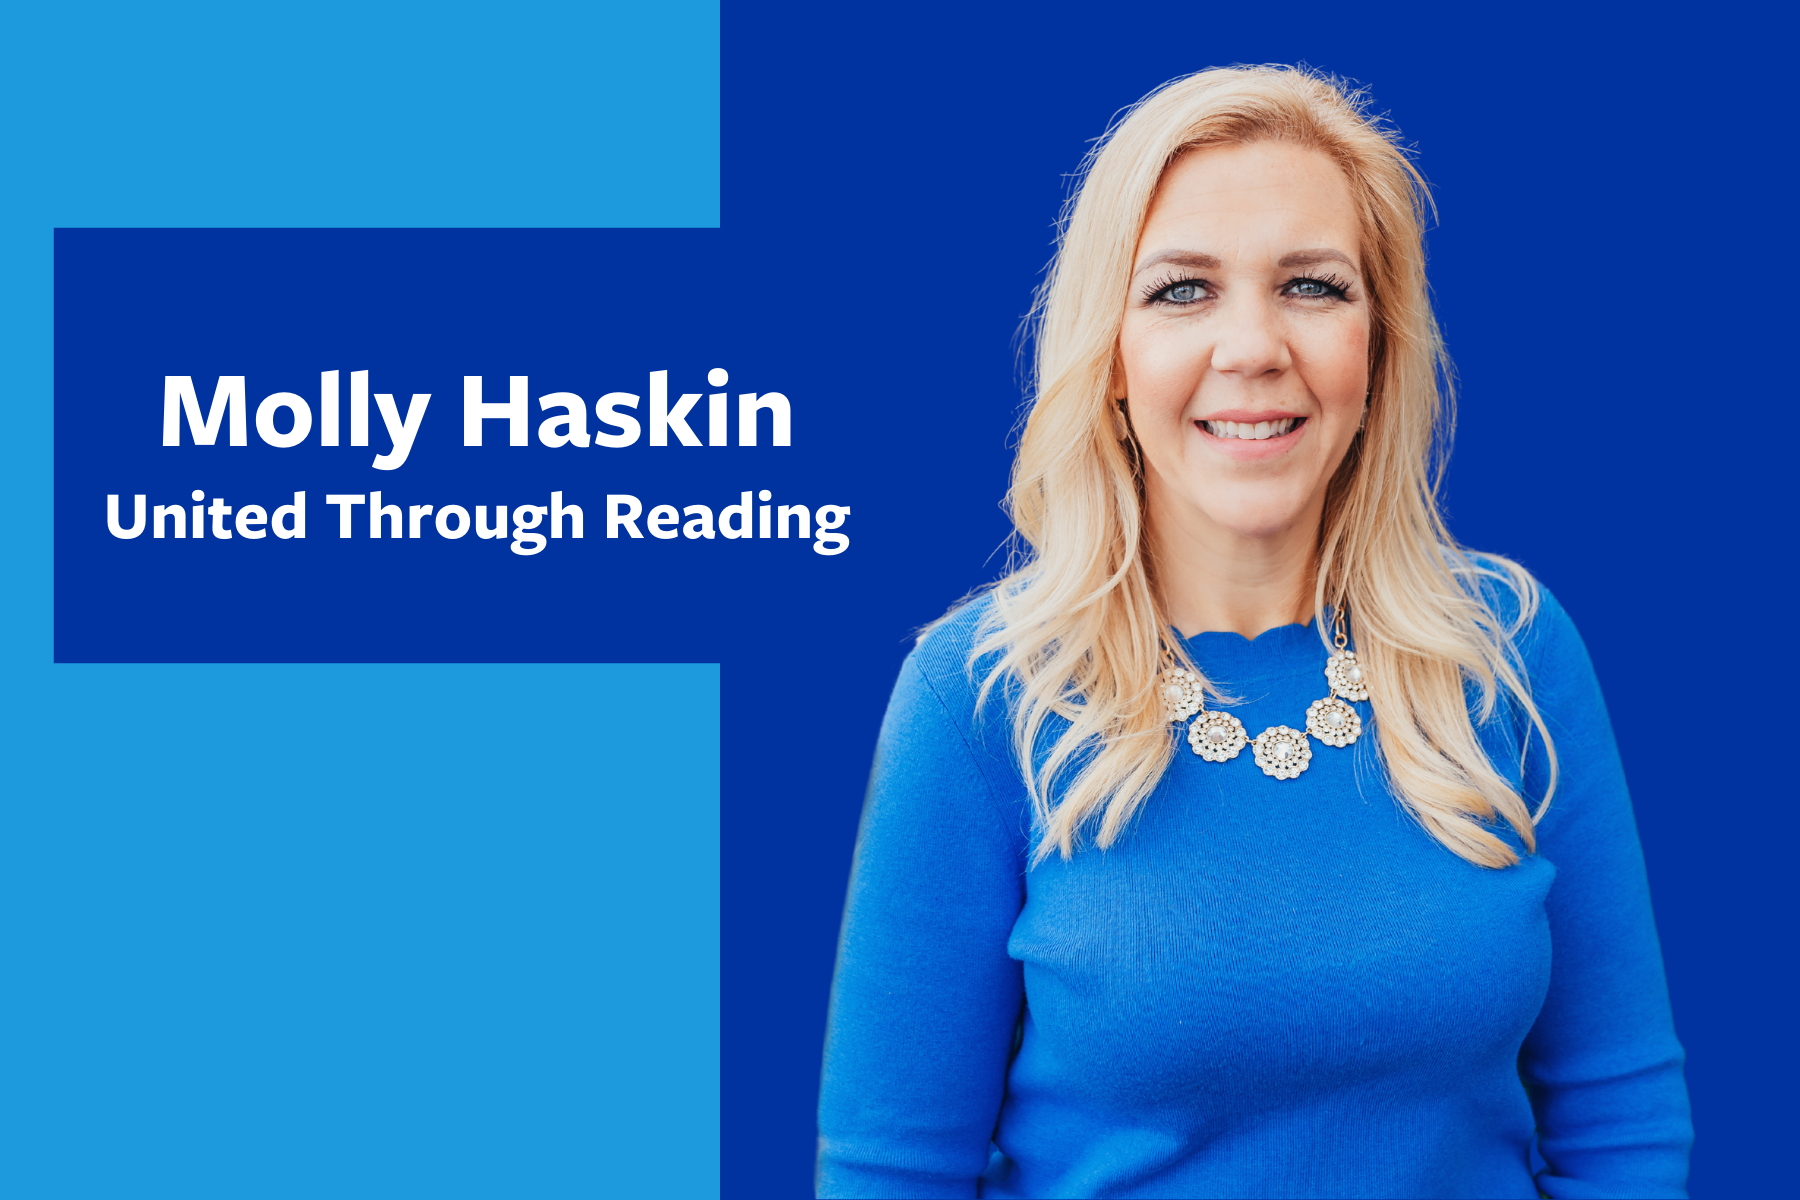 A photo of Molly Haskin, guest of the Ready for Reading Podcast